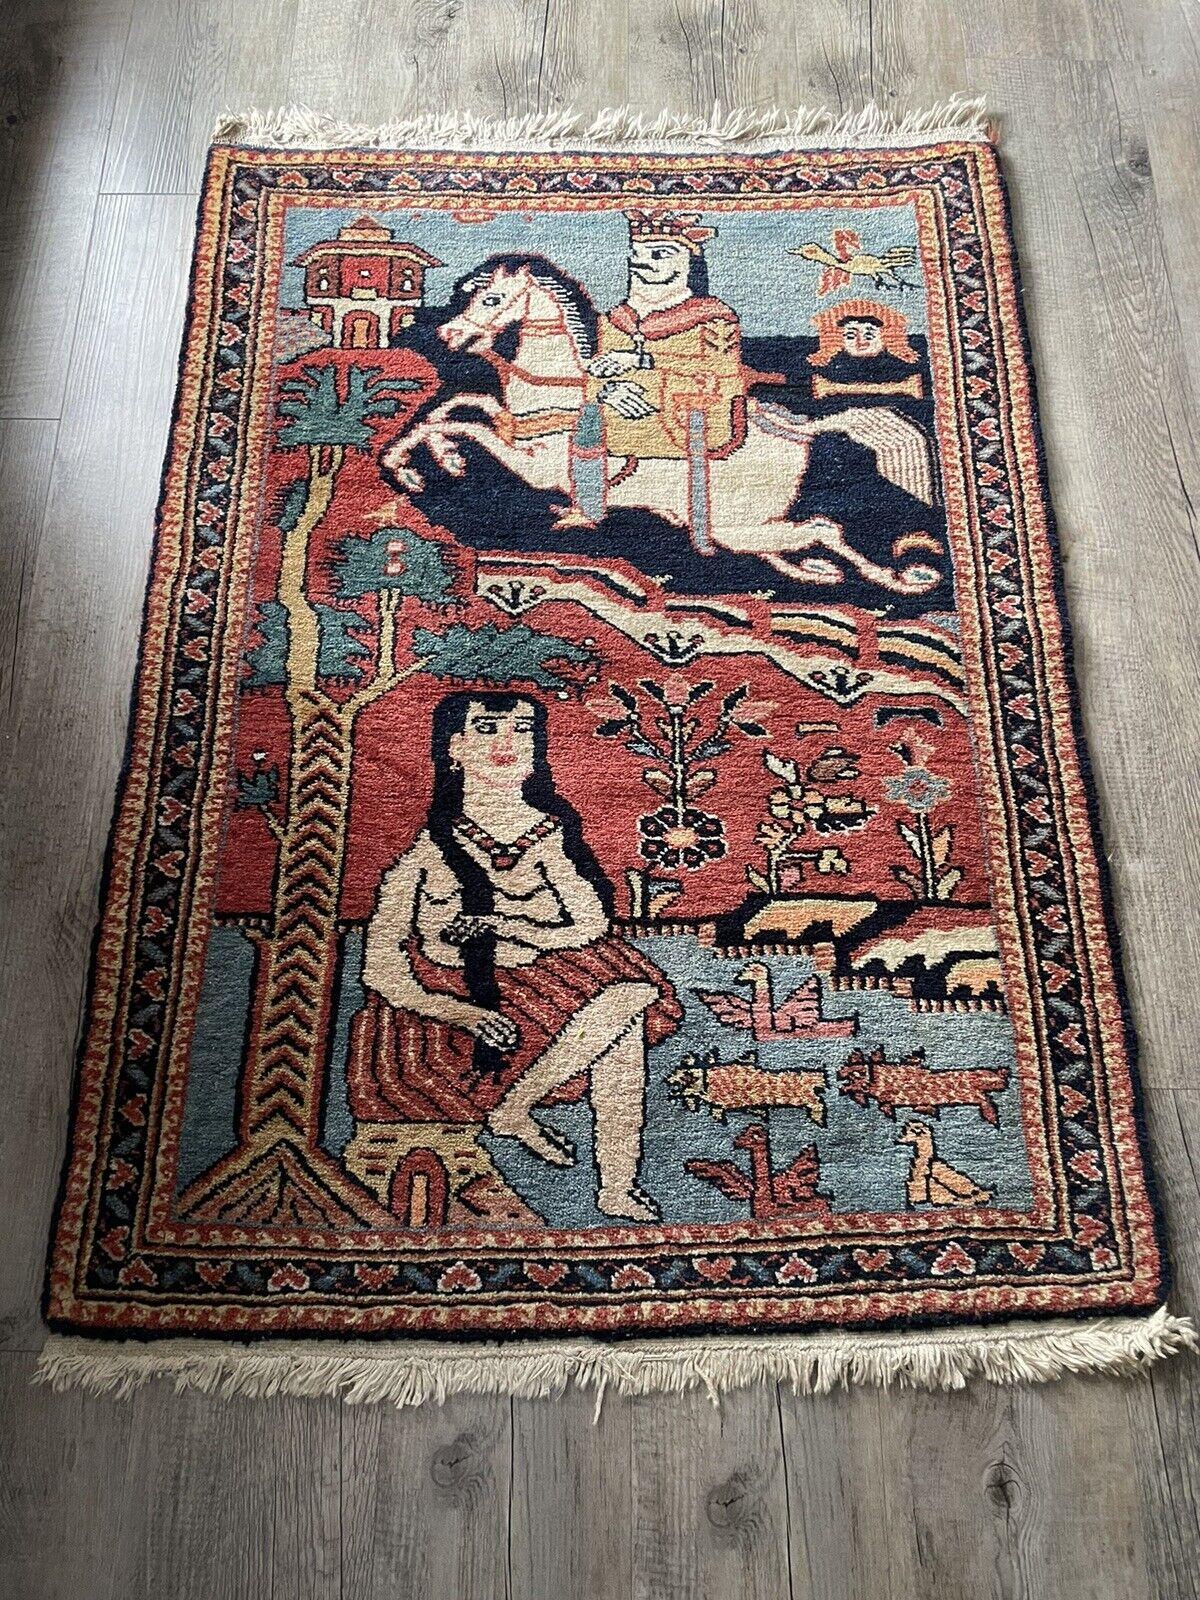 Handmade Antique Persian Style Lilihan Collectible Rug 2.2' x 3.1', 1920s - 1N01 For Sale 2